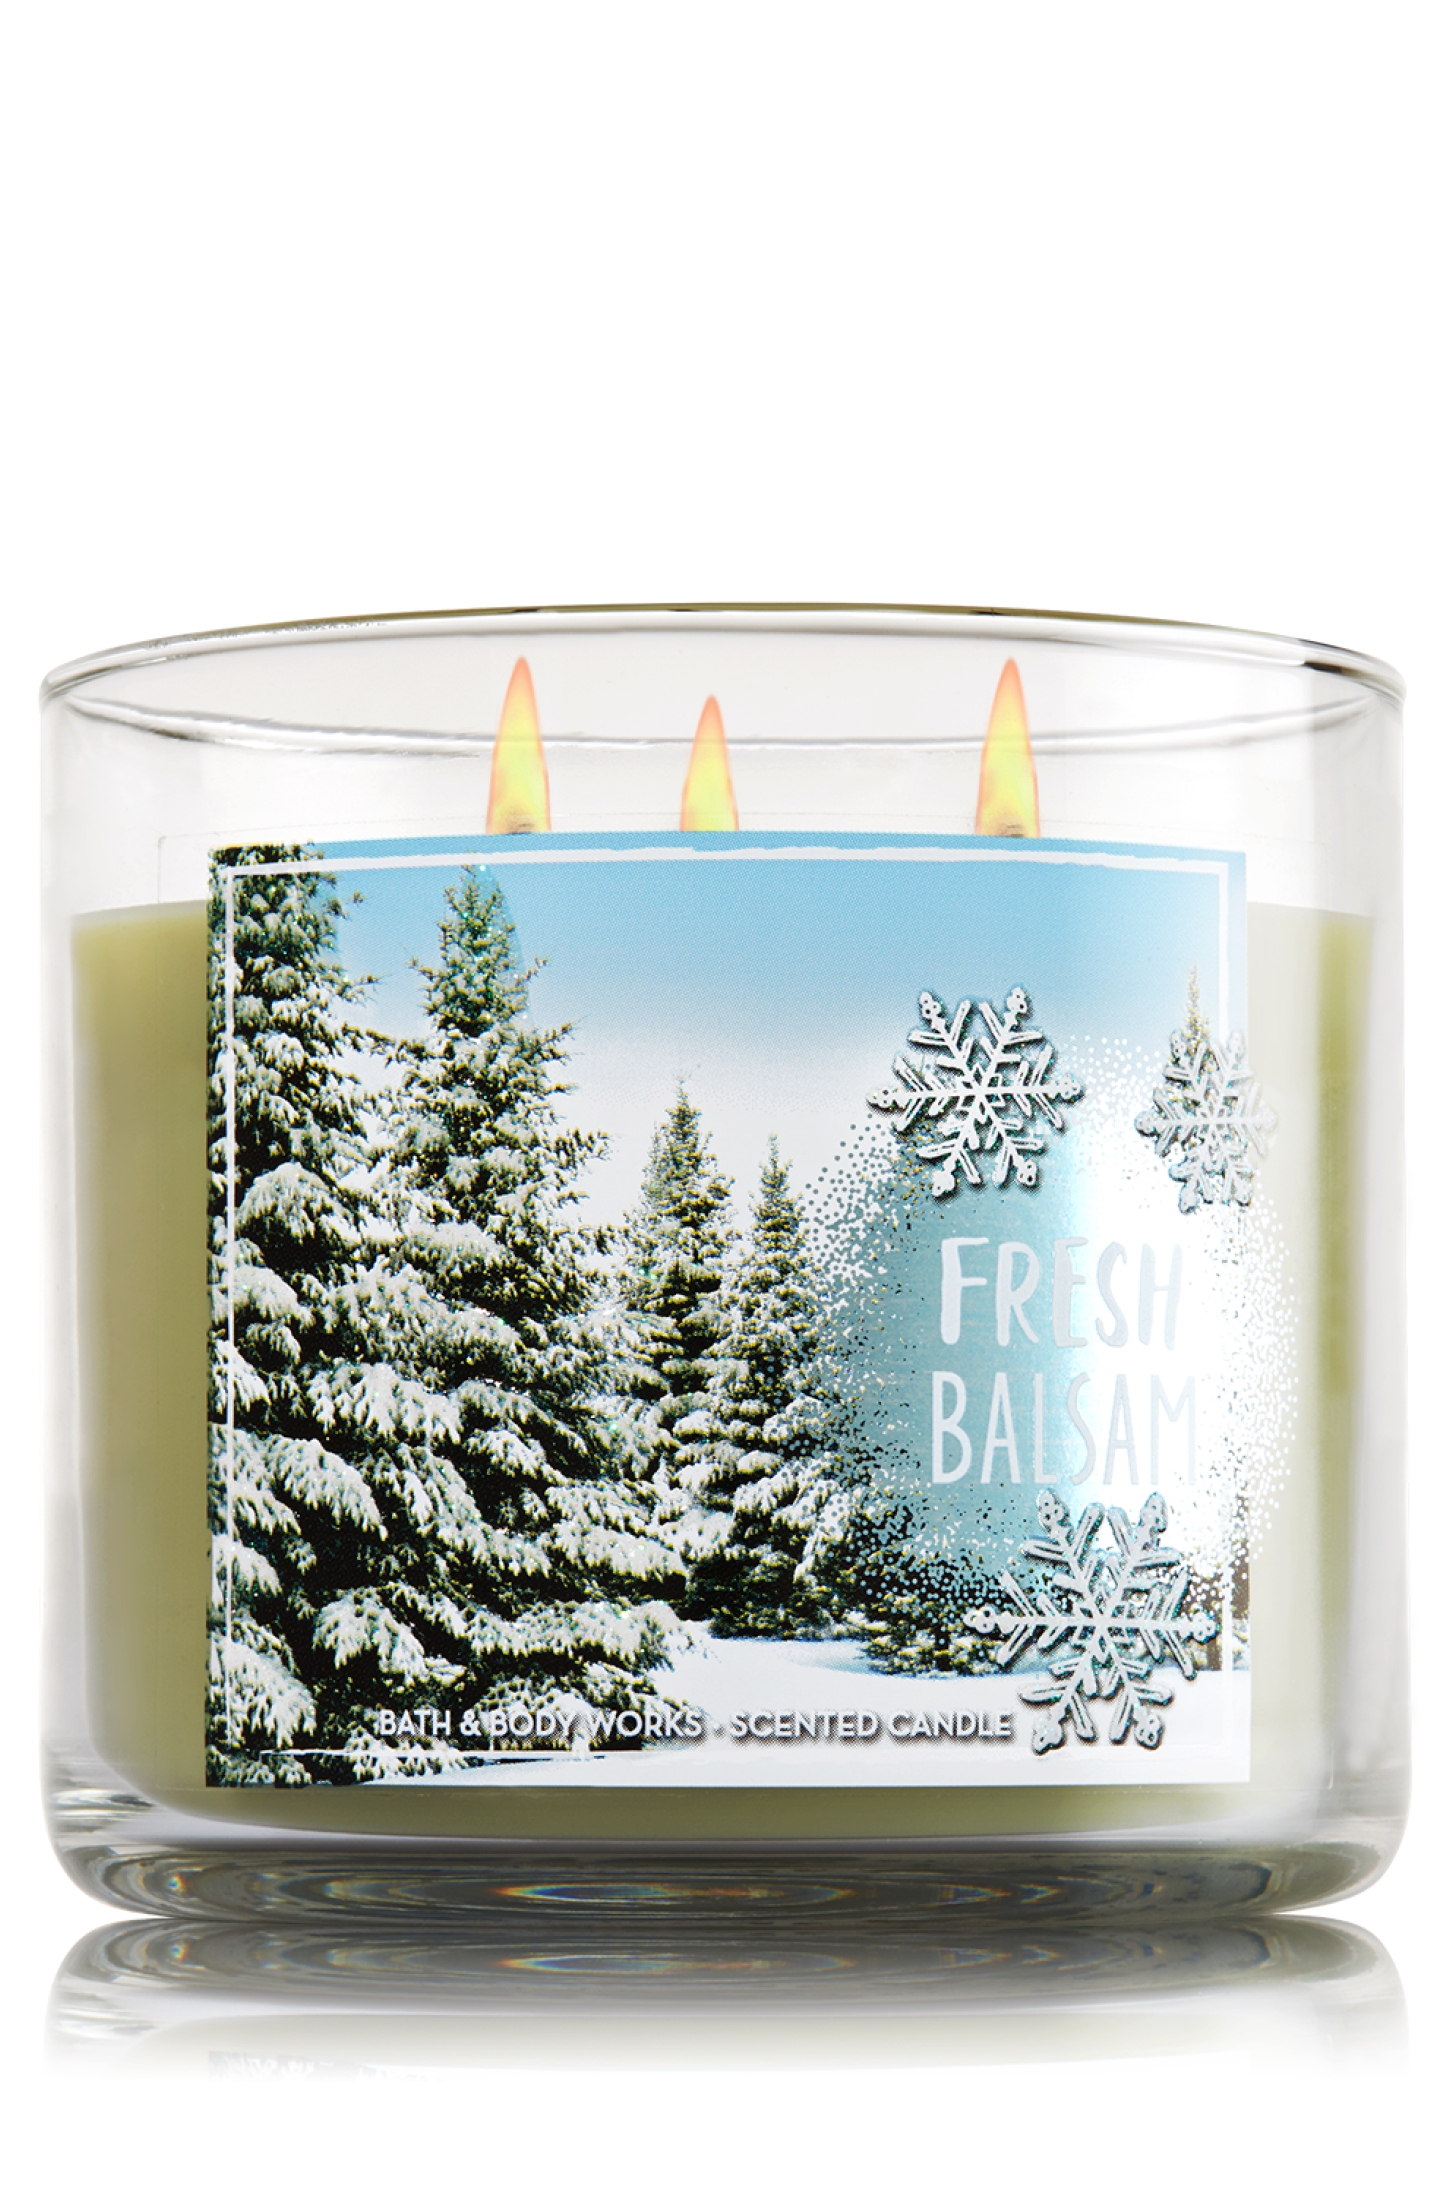 $8.50 3 - Wick Candles at Bath and Body Works 12/3 In store and Online